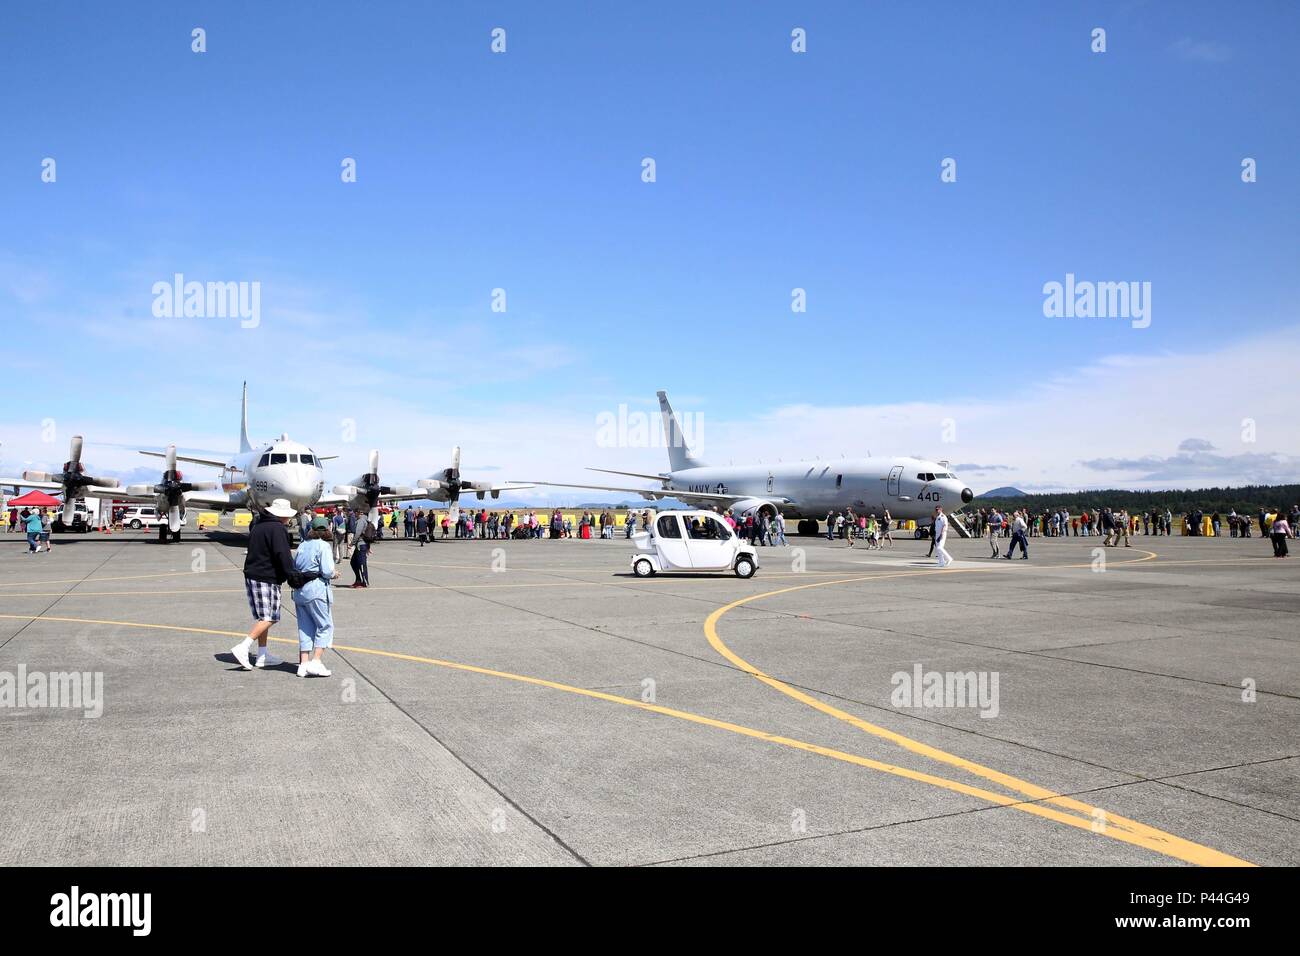 160625-N-DC740-037 OAK HARBOR, Wash. (June 25, 2016)  Guests line up to tour a P-3 Orion, left, and a P-8 Poseidon during Naval Air Station Whidbey Island's (NASWI) open house. The open house provides the general public an opportunity to interact with Sailors and learn more about NASWI's role both in the community and the Navy. (U.S. Navy photo by Mass Communication Specialist 2nd Class John Hetherington/Released) Stock Photo